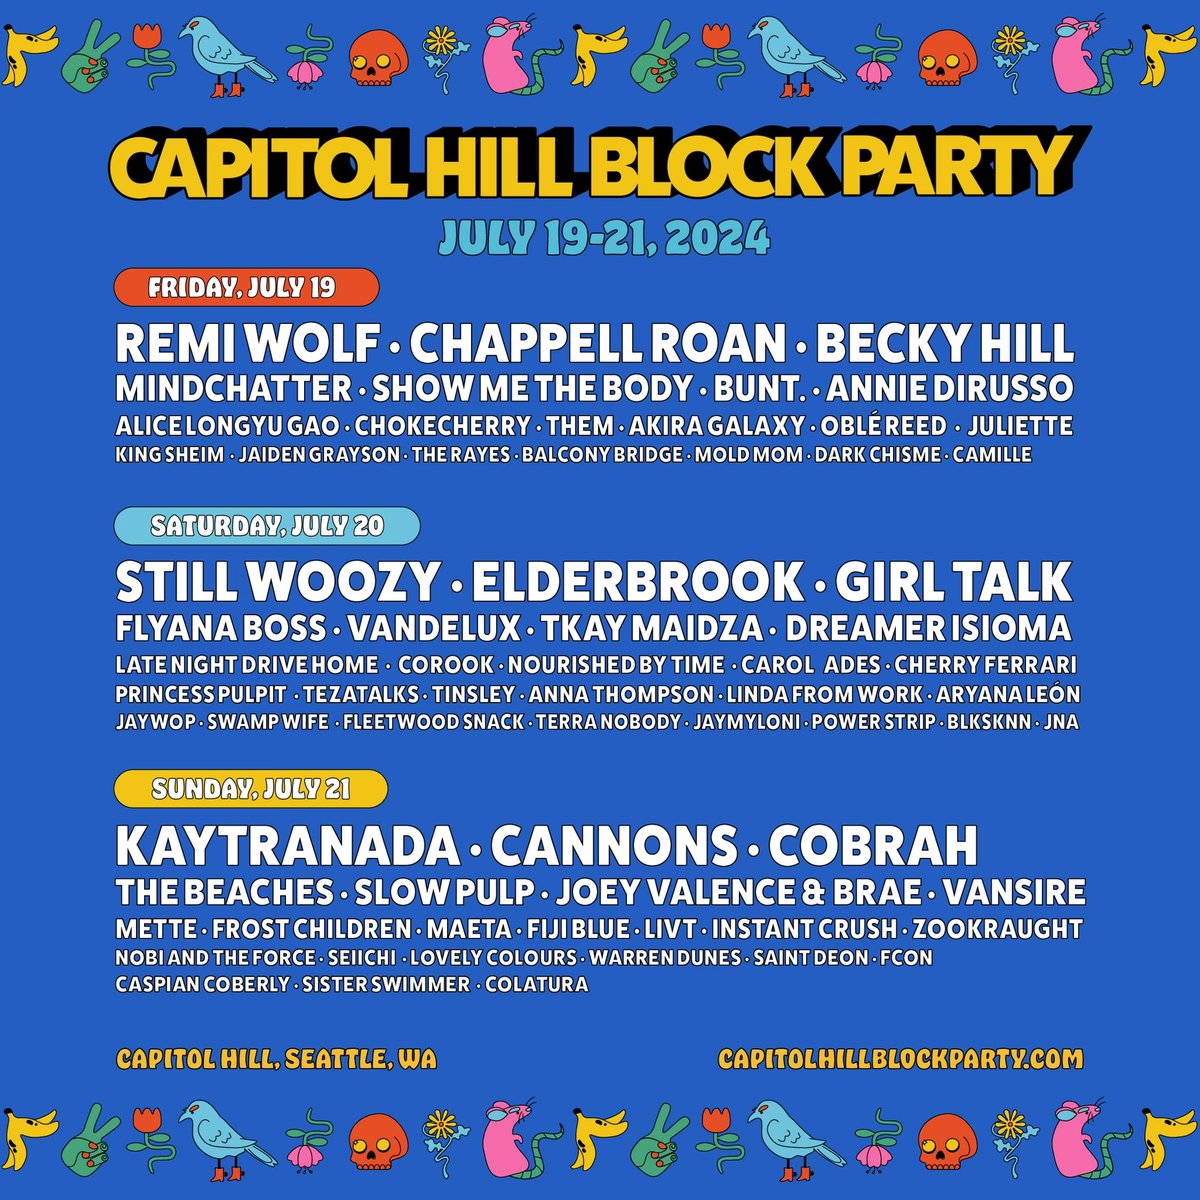 See you soon @CHBlockParty !!!